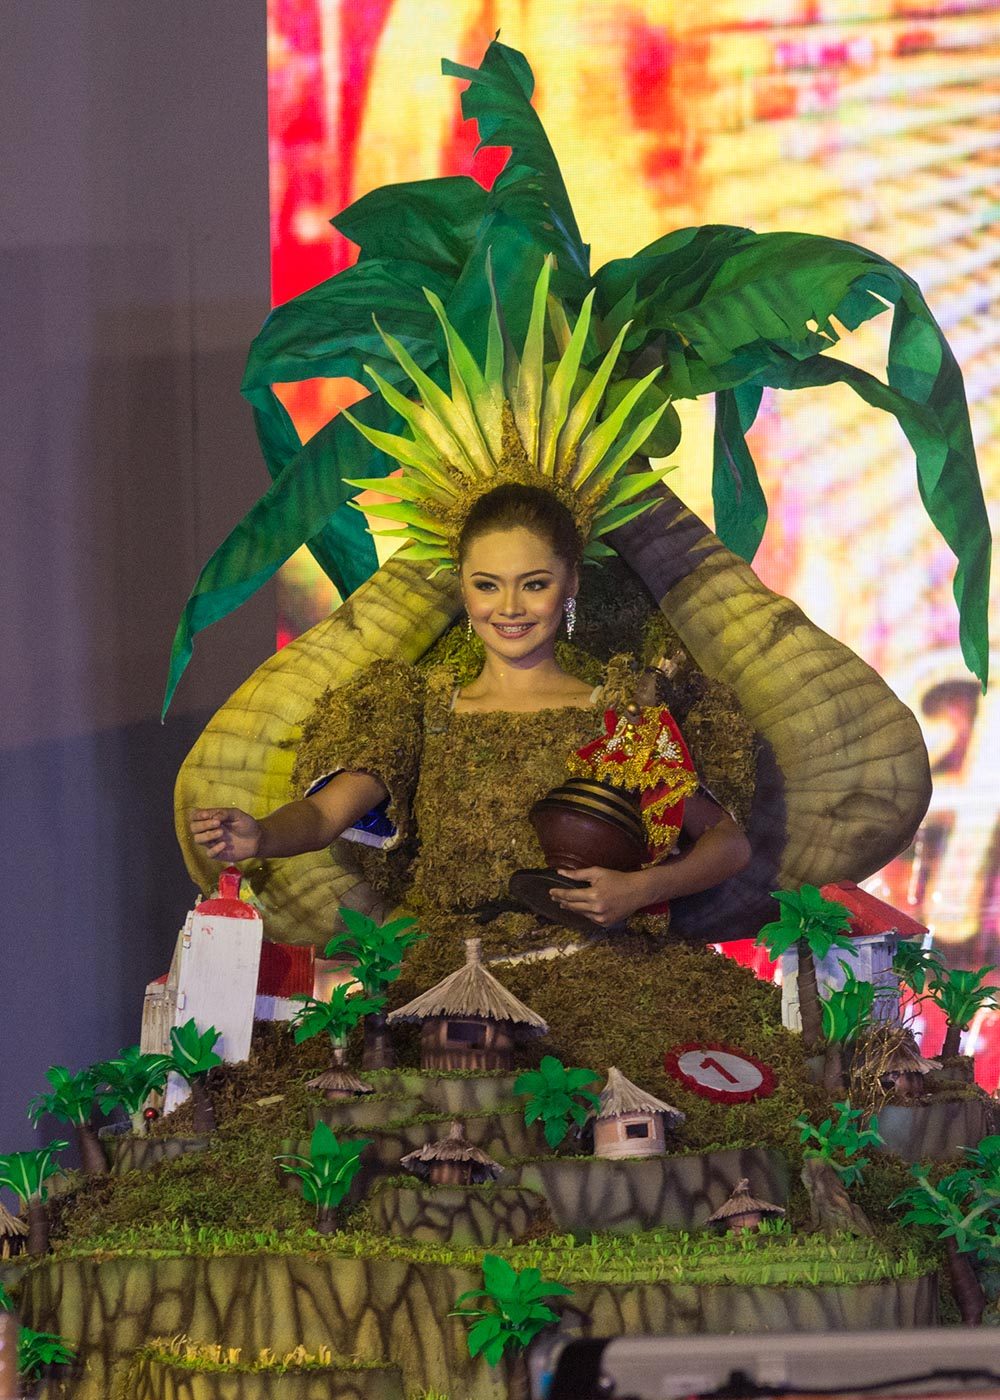 VIRAL BEAUTY.  Isabel Dalag Luche of Tribu Kandaya of Daanbantayan, Cebu clinched the Best in Festival Costume Award designed by Mark Barry Luche in the Sinulog Festival Queen 2018 competition. The costume's theme is diversity becoming unified in homage to the Sr Sto Niño 